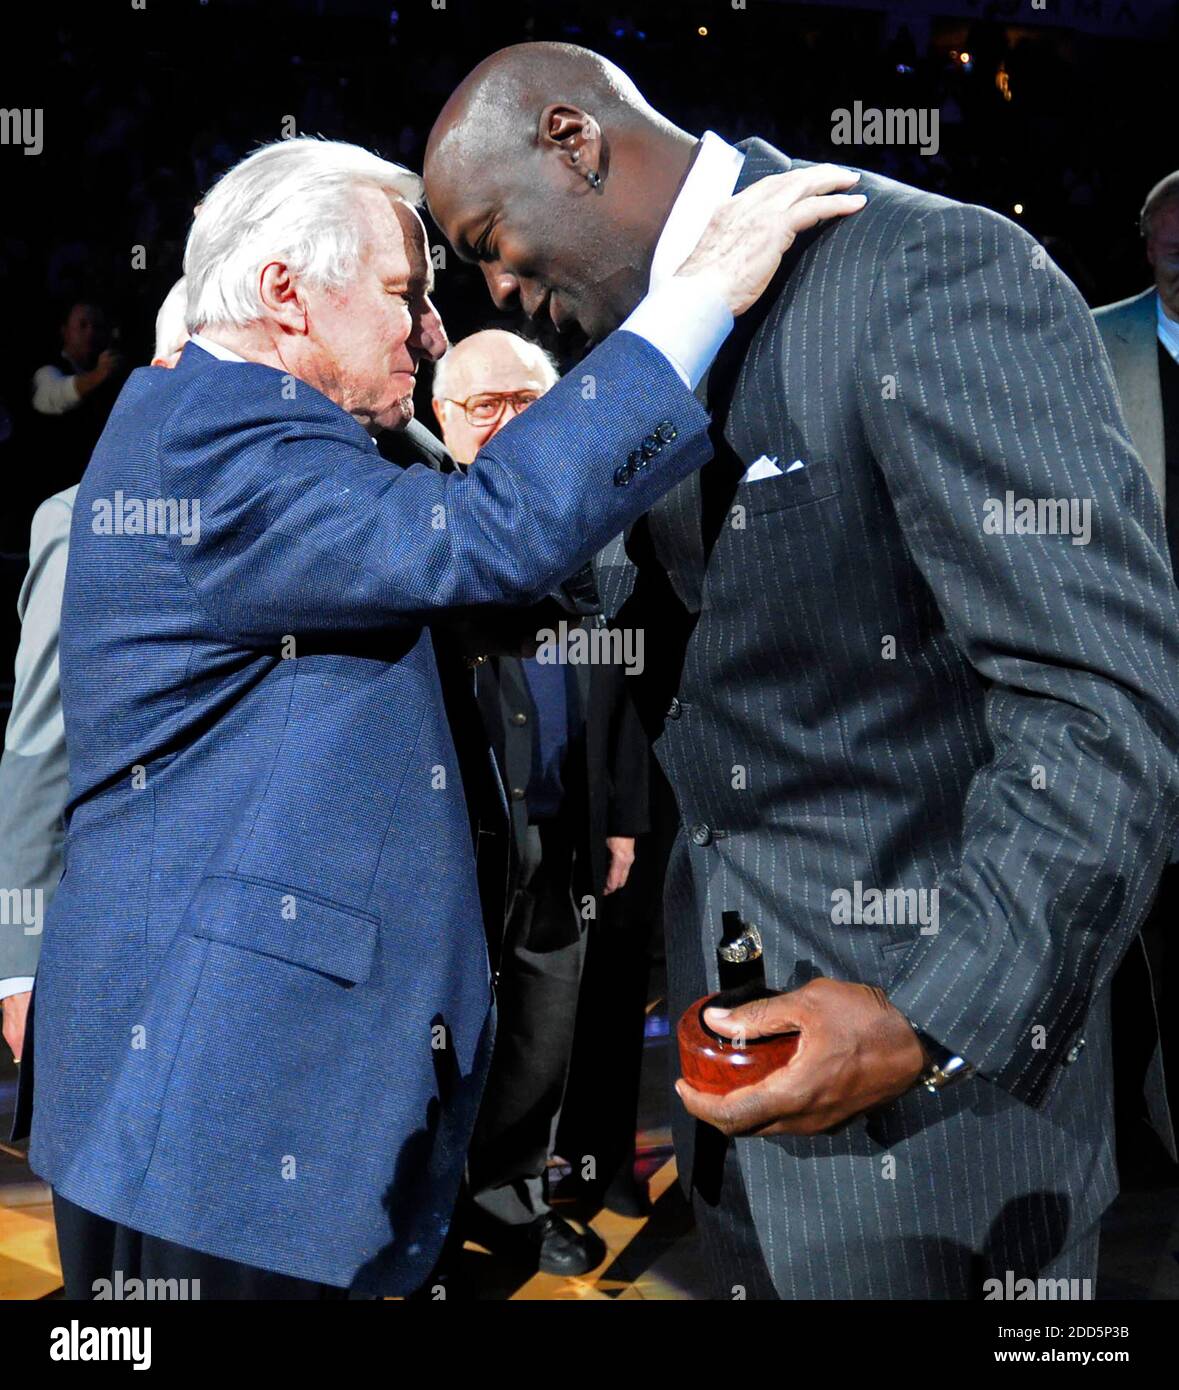 NO FILM, NO VIDEO, NO TV, NO DOCUMENTARY - Former North Carolina coach Dean Smith congratulates Charlotte Bobcats majority owner, and former player, Michael Jordan after Jordan was inducted into the North Carolina Sports Hall of Fame at halftime of the NBA Basketball match, Bobcats vs Toronto Raptors at the Time Warner Cable Arena in Charlotte, NC, USA on December 14, 2010. Photo by David T. Foster III/Charlotte Observer/MCT/ABACAPRESS.COM Stock Photo